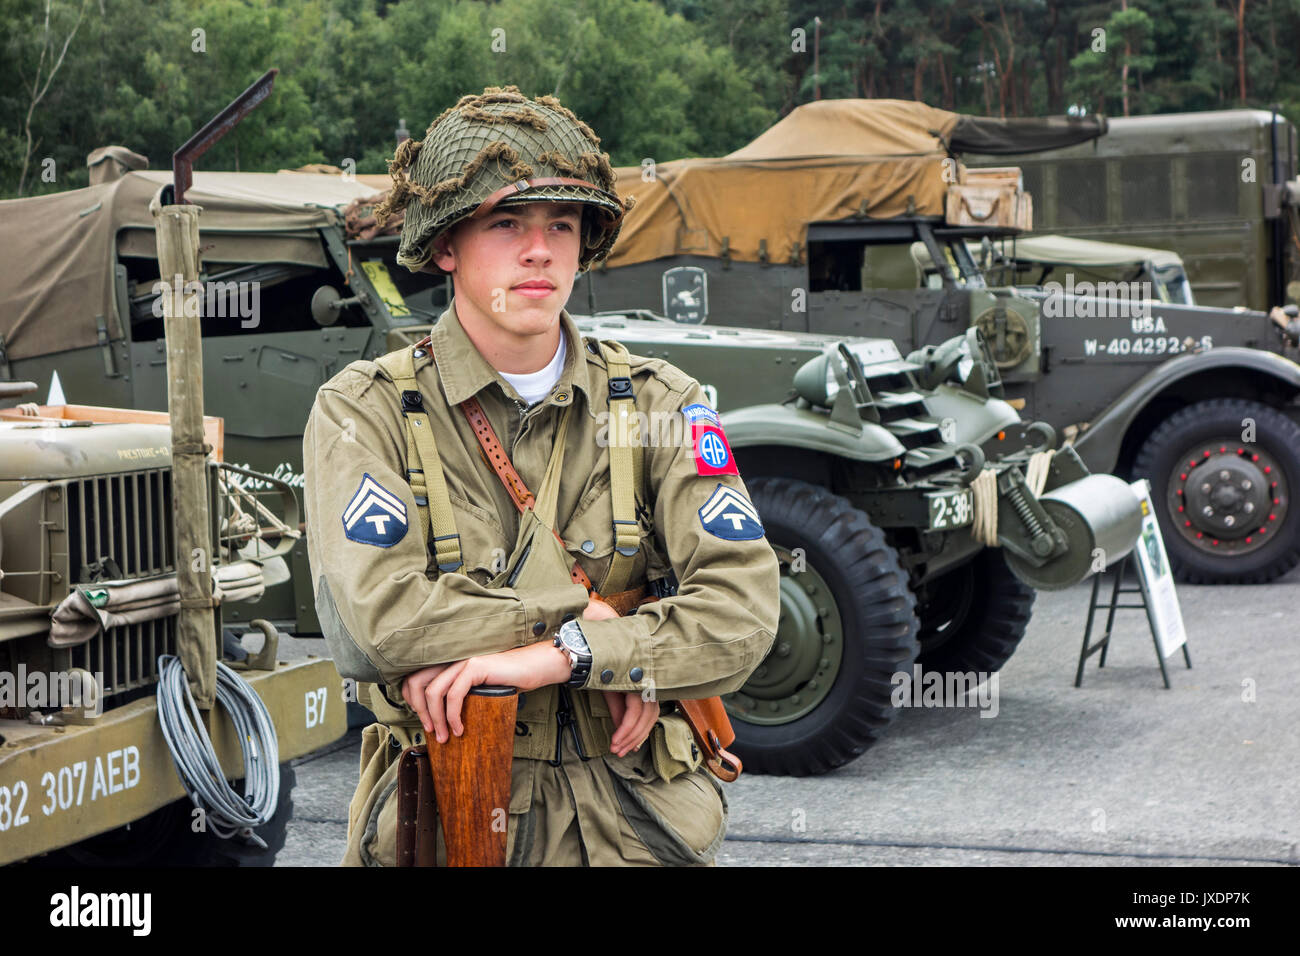 Young re-enactor posing in WW2 US Airborne uniform with Technician/5th ...